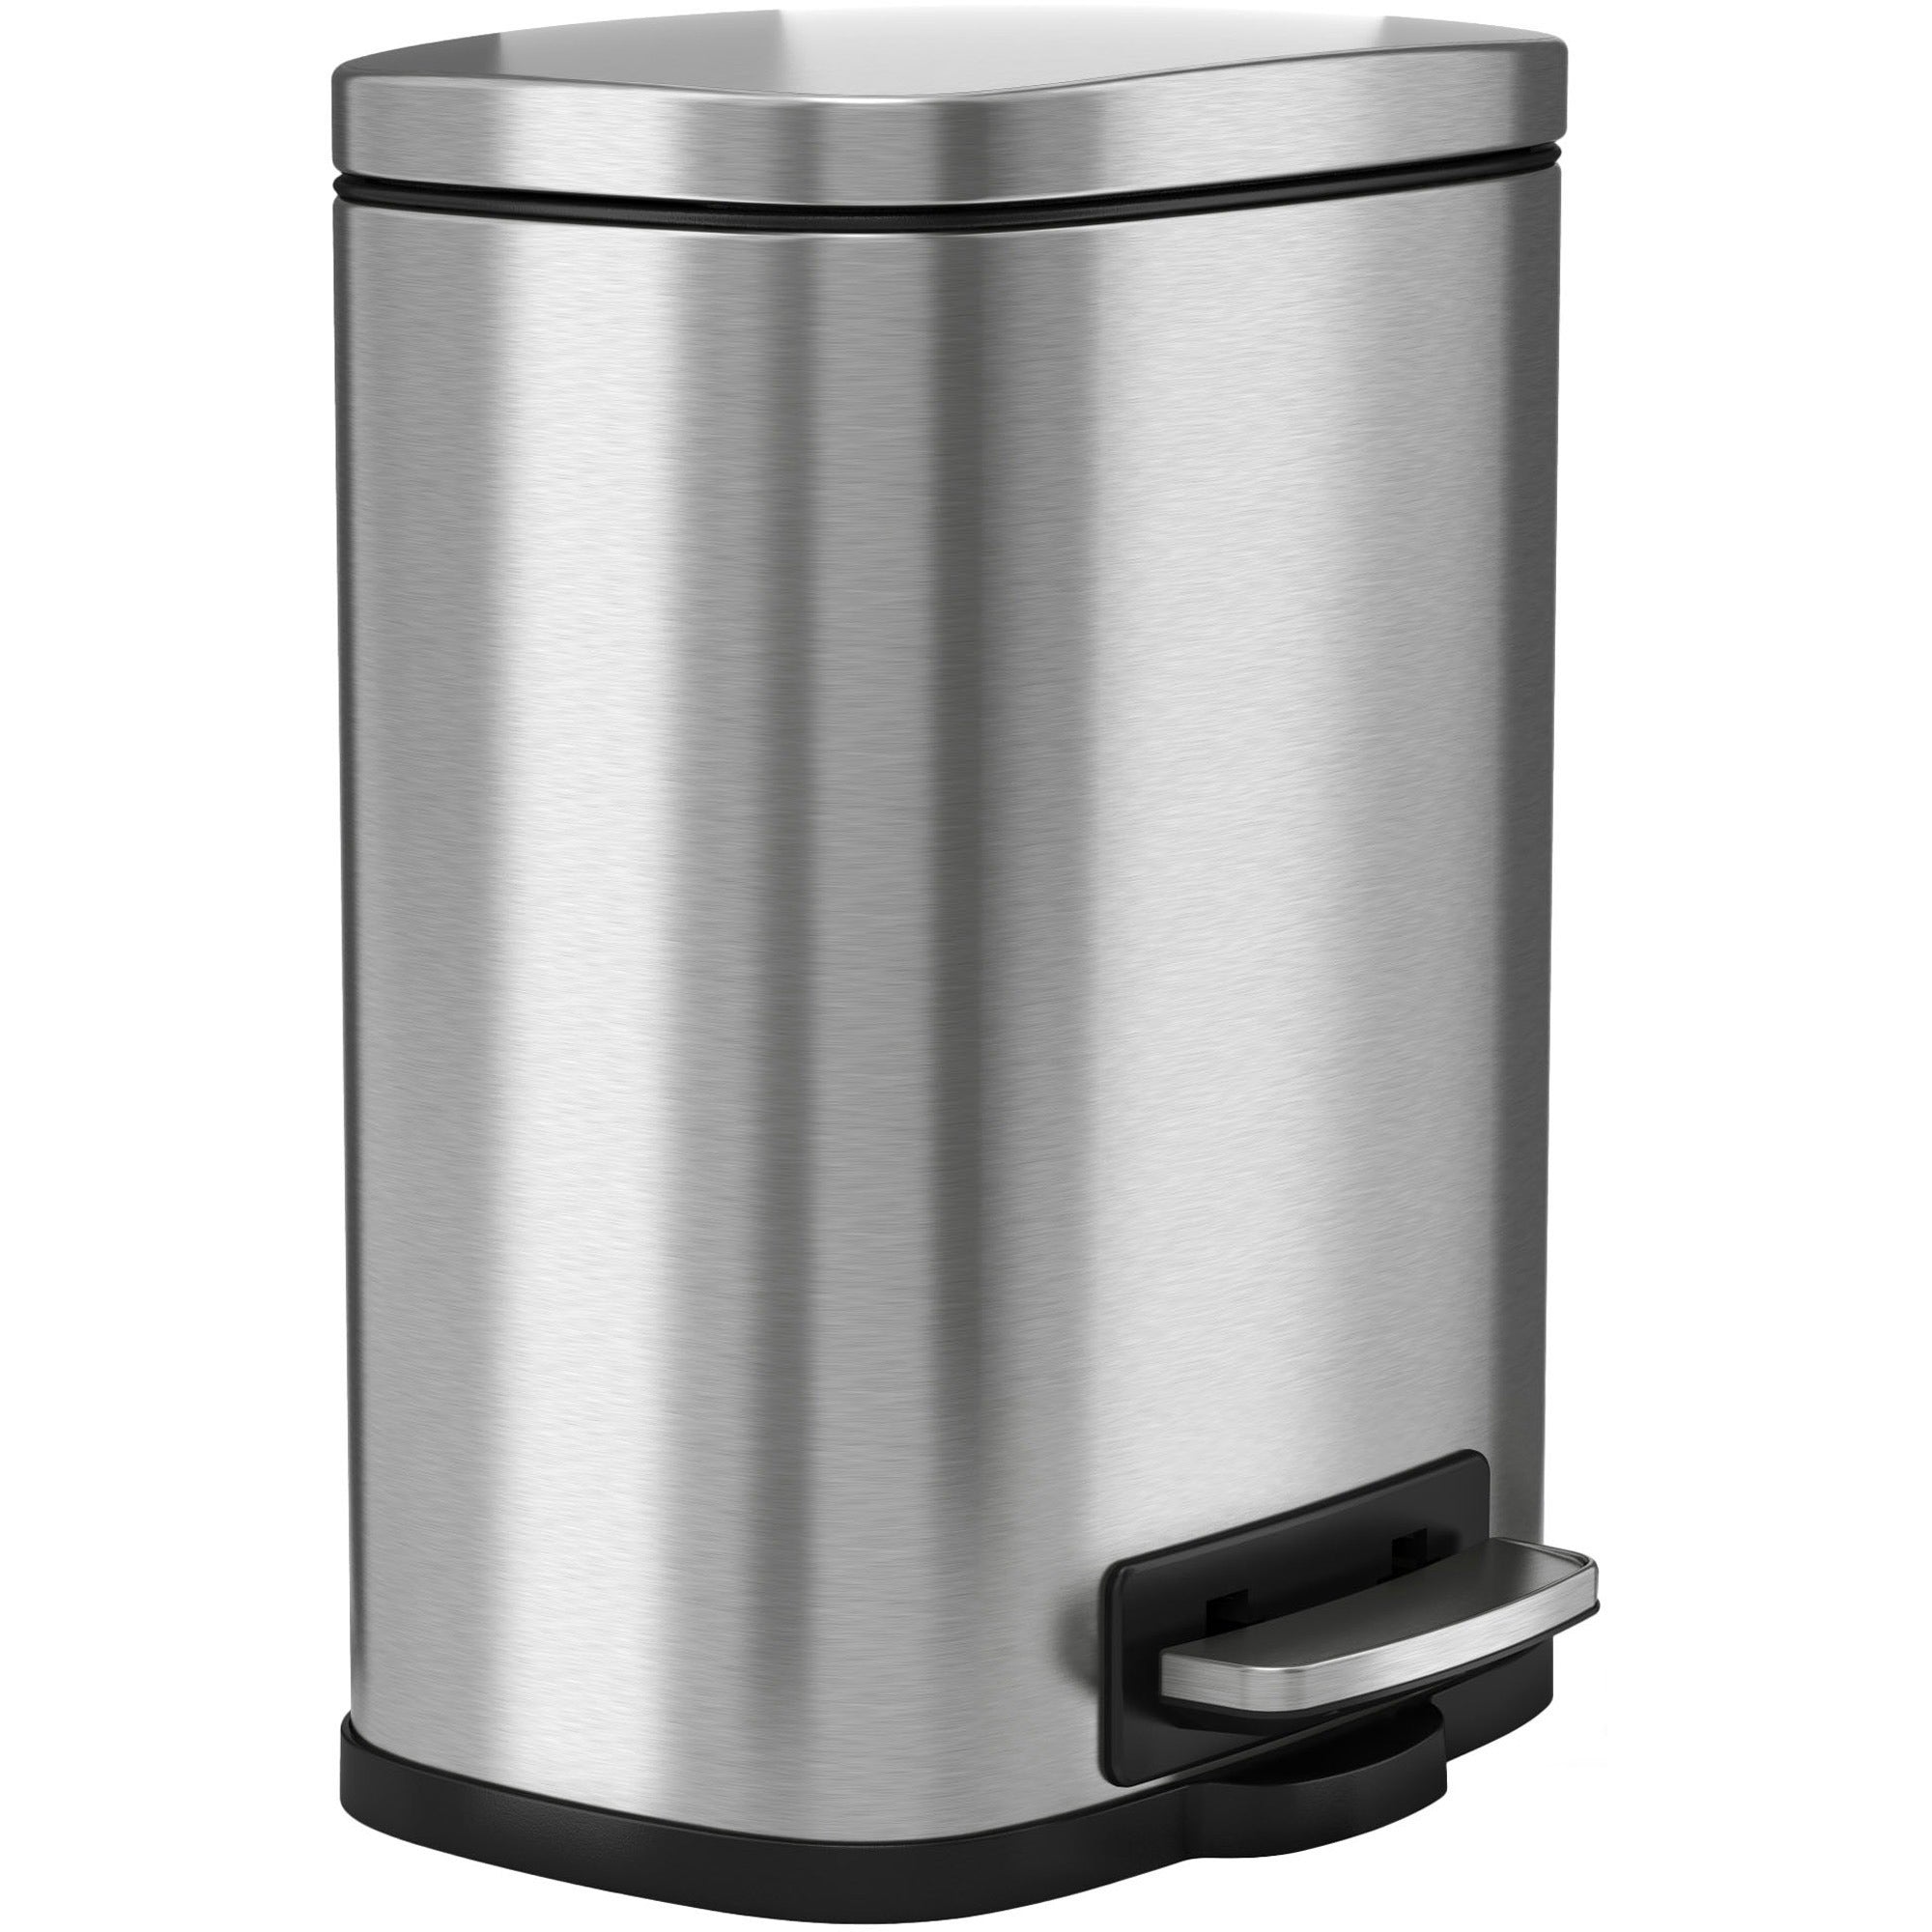 hls-commercial-fire-rated-soft-step-trash-can-132-gal-capacity-pedal-control-handle-durable-smooth-lid-closure-fingerprint-proof-fire-retardant-removable-inner-bin-118-height-x-85-width-x-73-depth-stainless-steel-silver-1-ea_hlchlss01rfr - 1